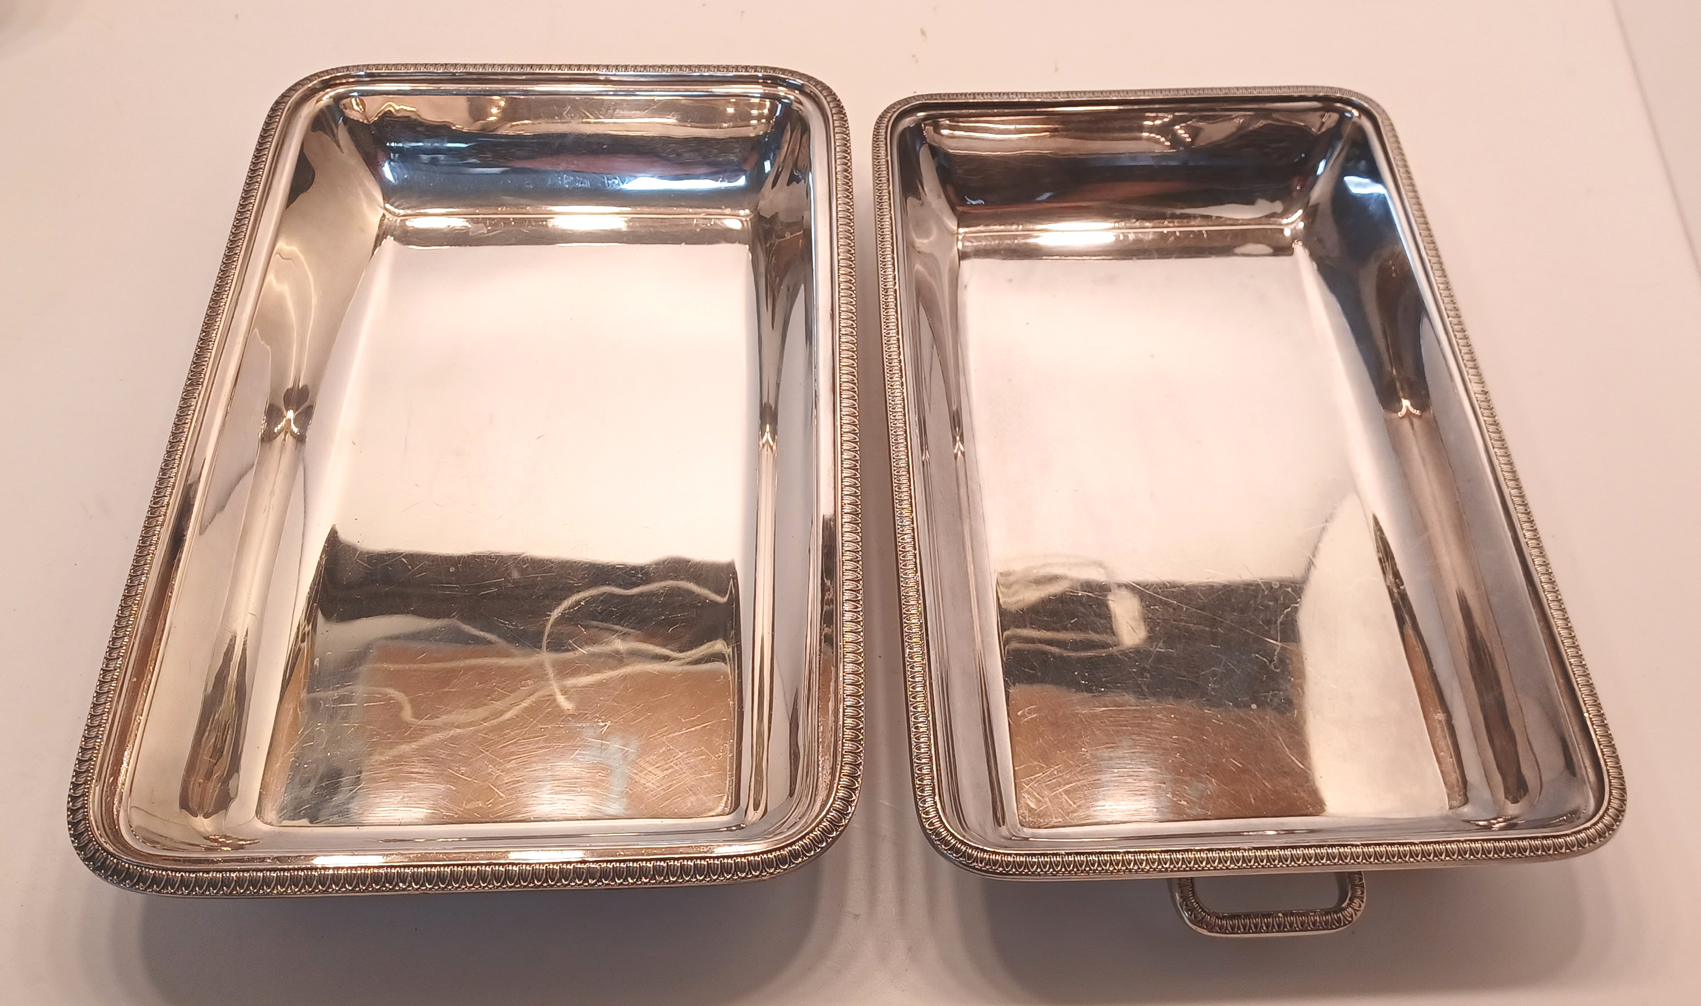 2 SILVER HANDLE TEA KNIVES CASED, SILVER PLATED MAPPIN AND WEBB TUREEN, SAUCE BOAT, AND 2  BASKETS - Image 6 of 6